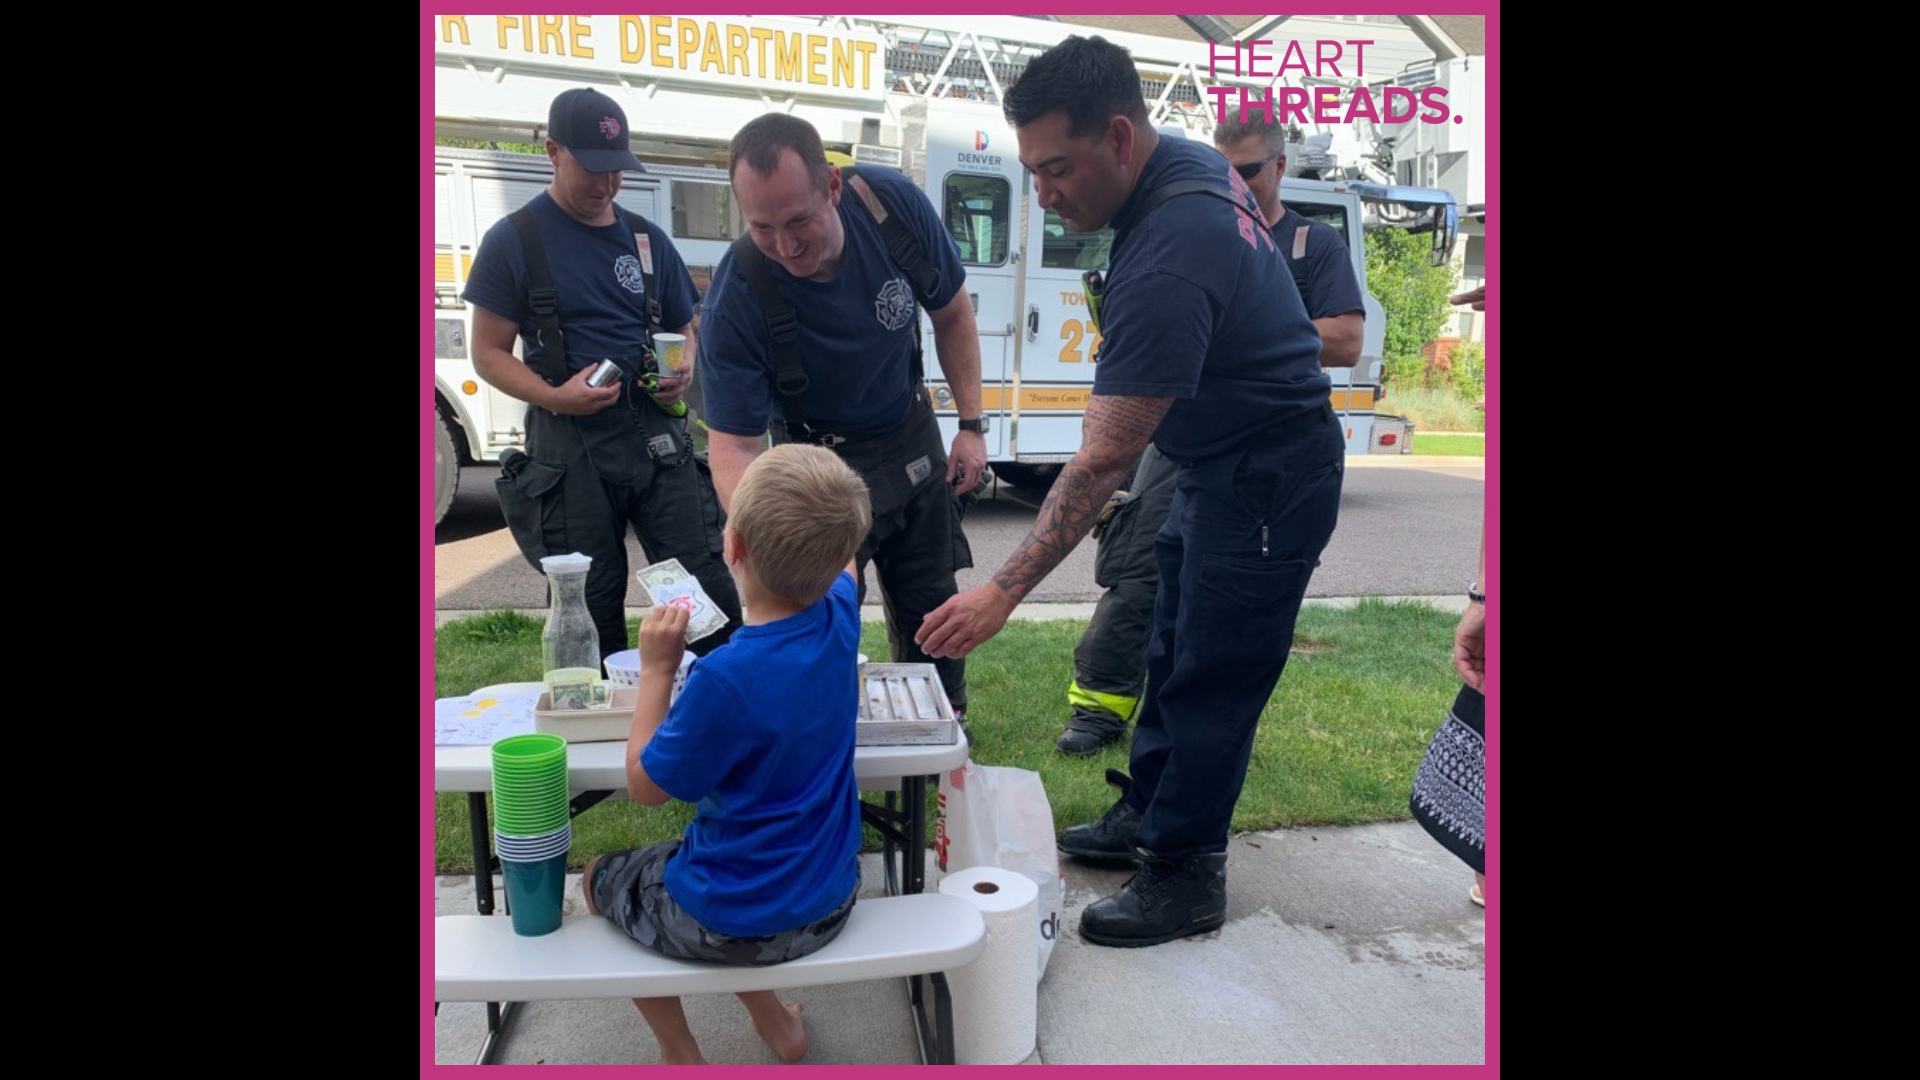 6-year-old Brady and his father always wanted to open a lemonade stand together. But when his dad passed away, Brady decided to open the stand on his own. Thanks to community members like firefighters and police, the stand was a great success.